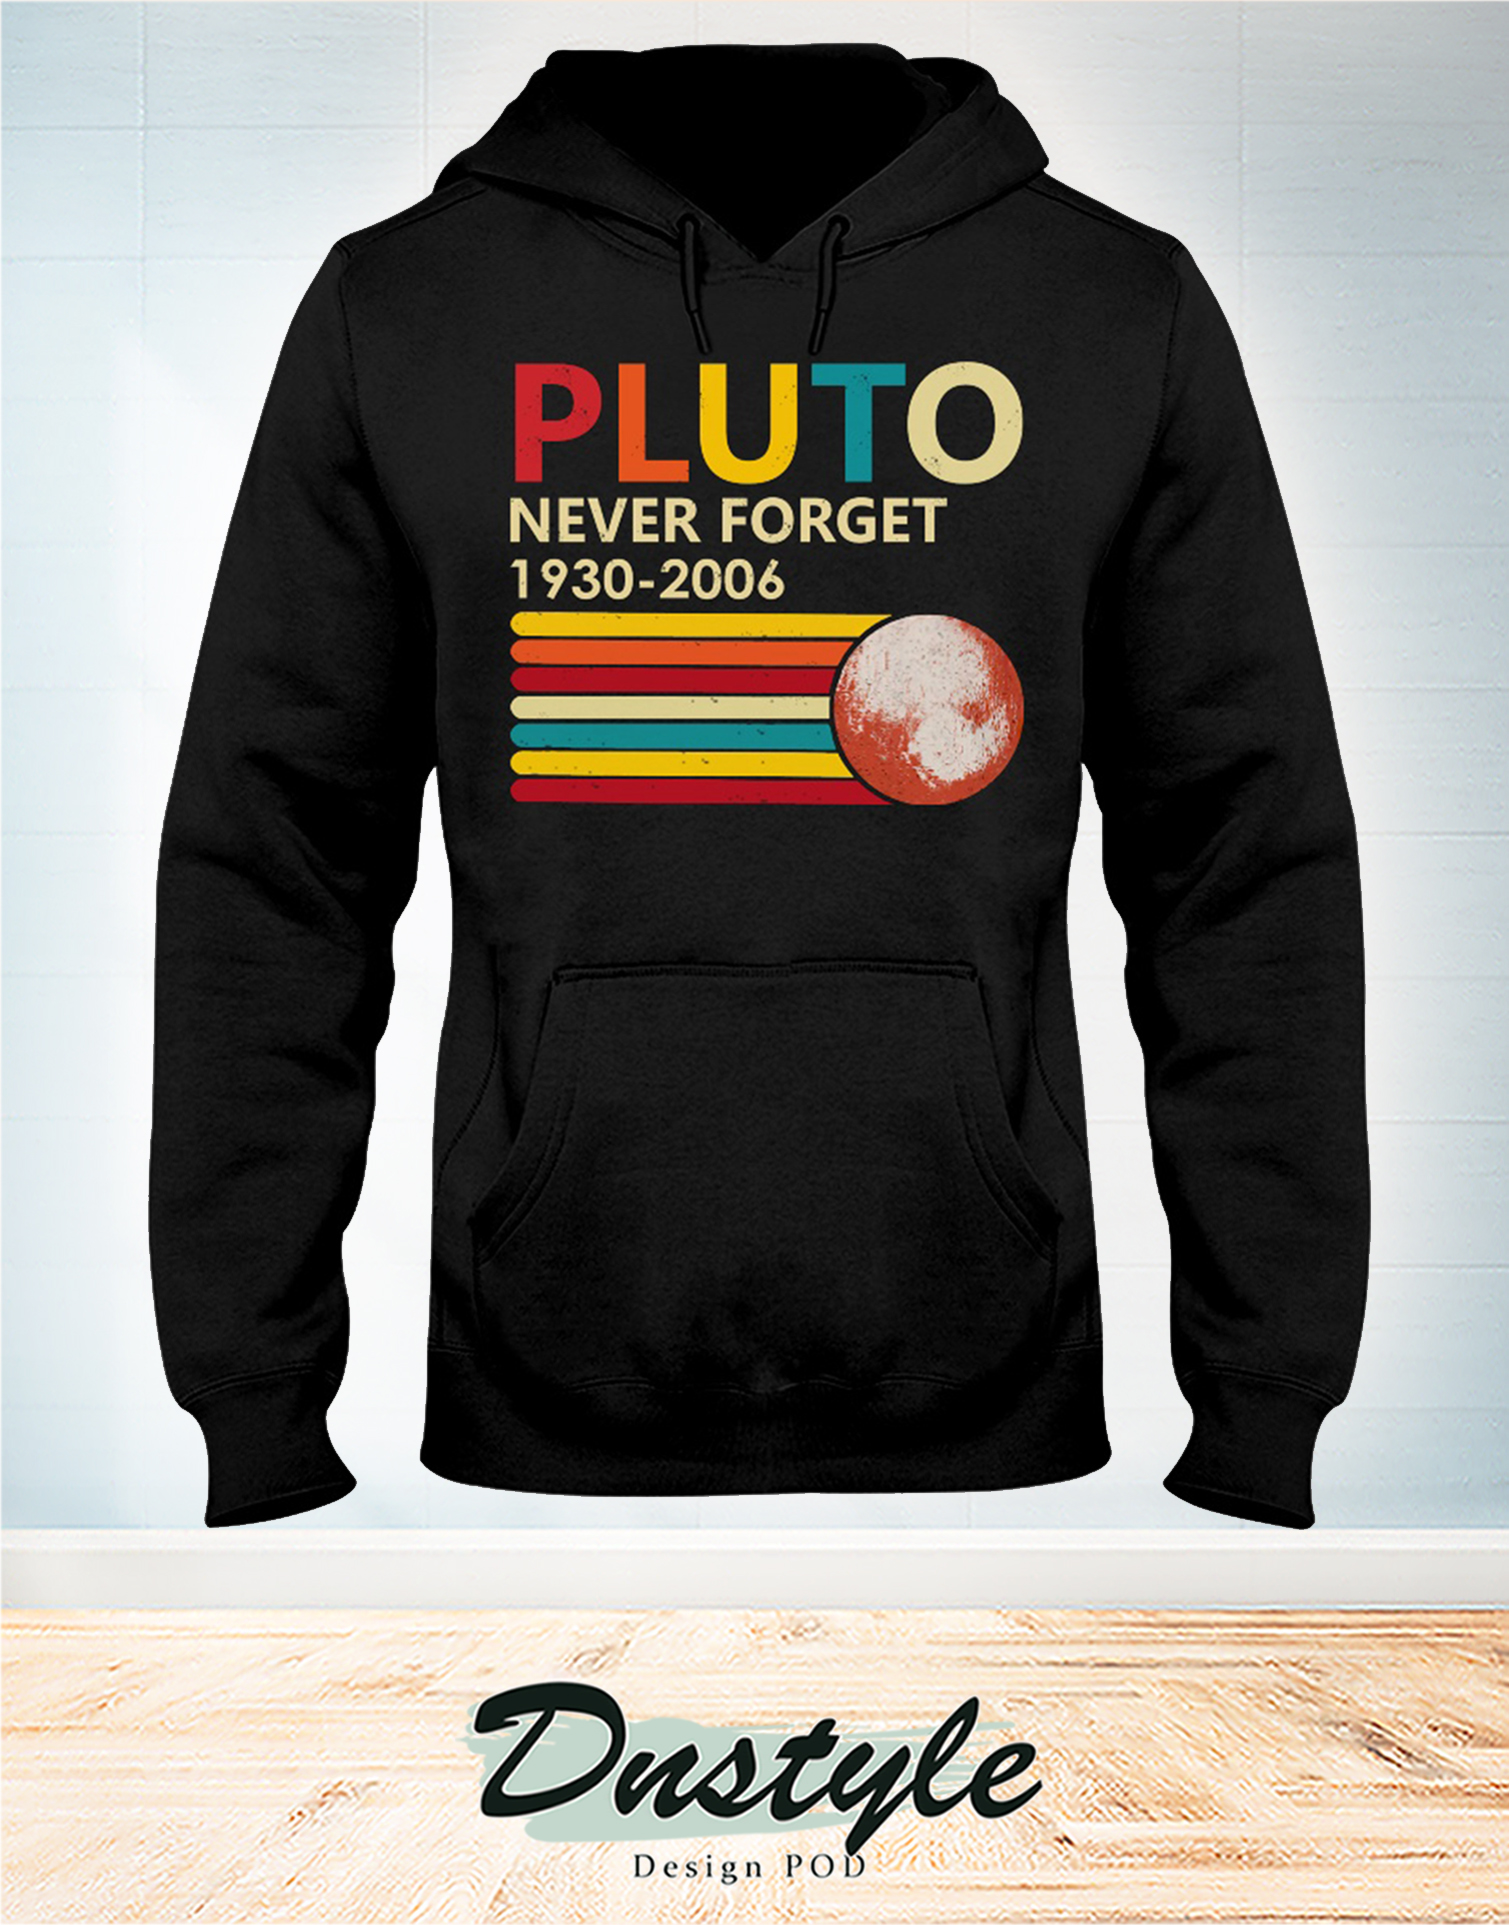 Pluto never forget 1930 - 2006 hoodie